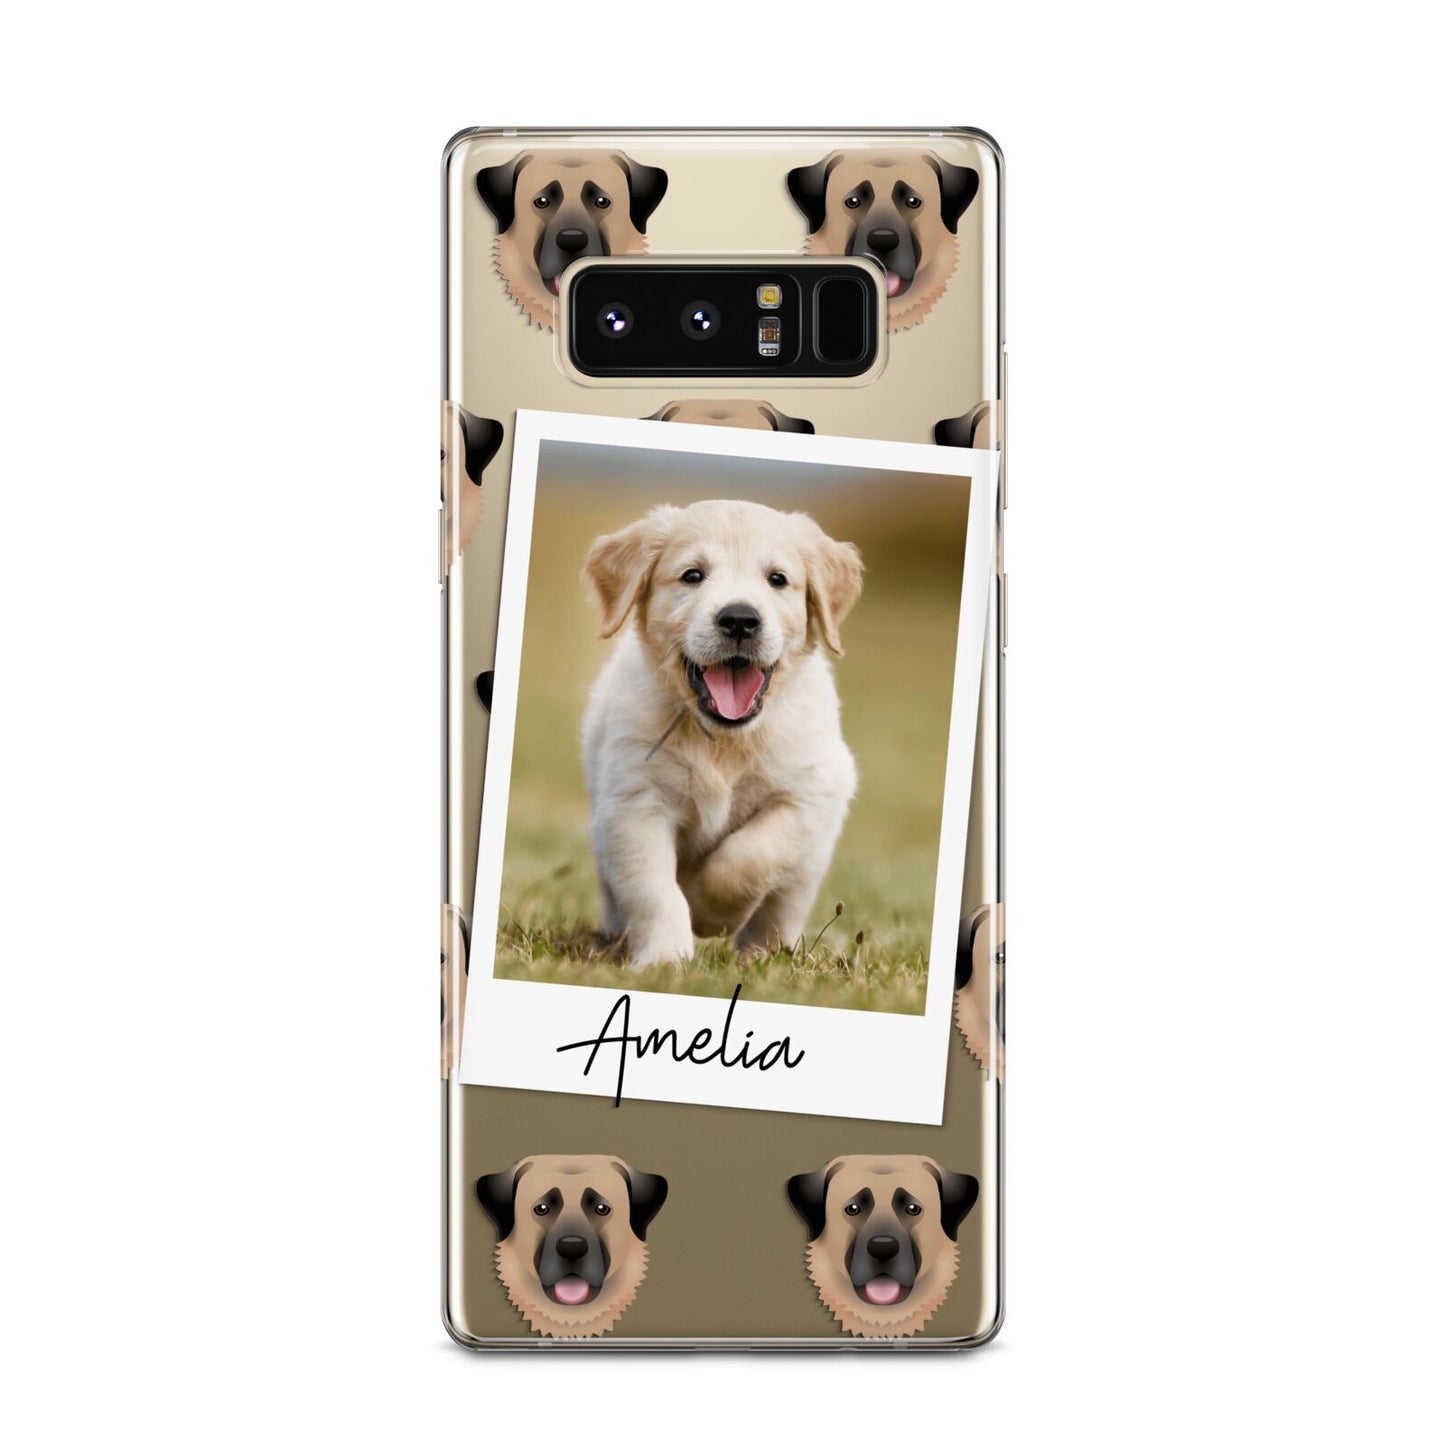 Personalised Dog Photo Samsung Galaxy Note 8 Case